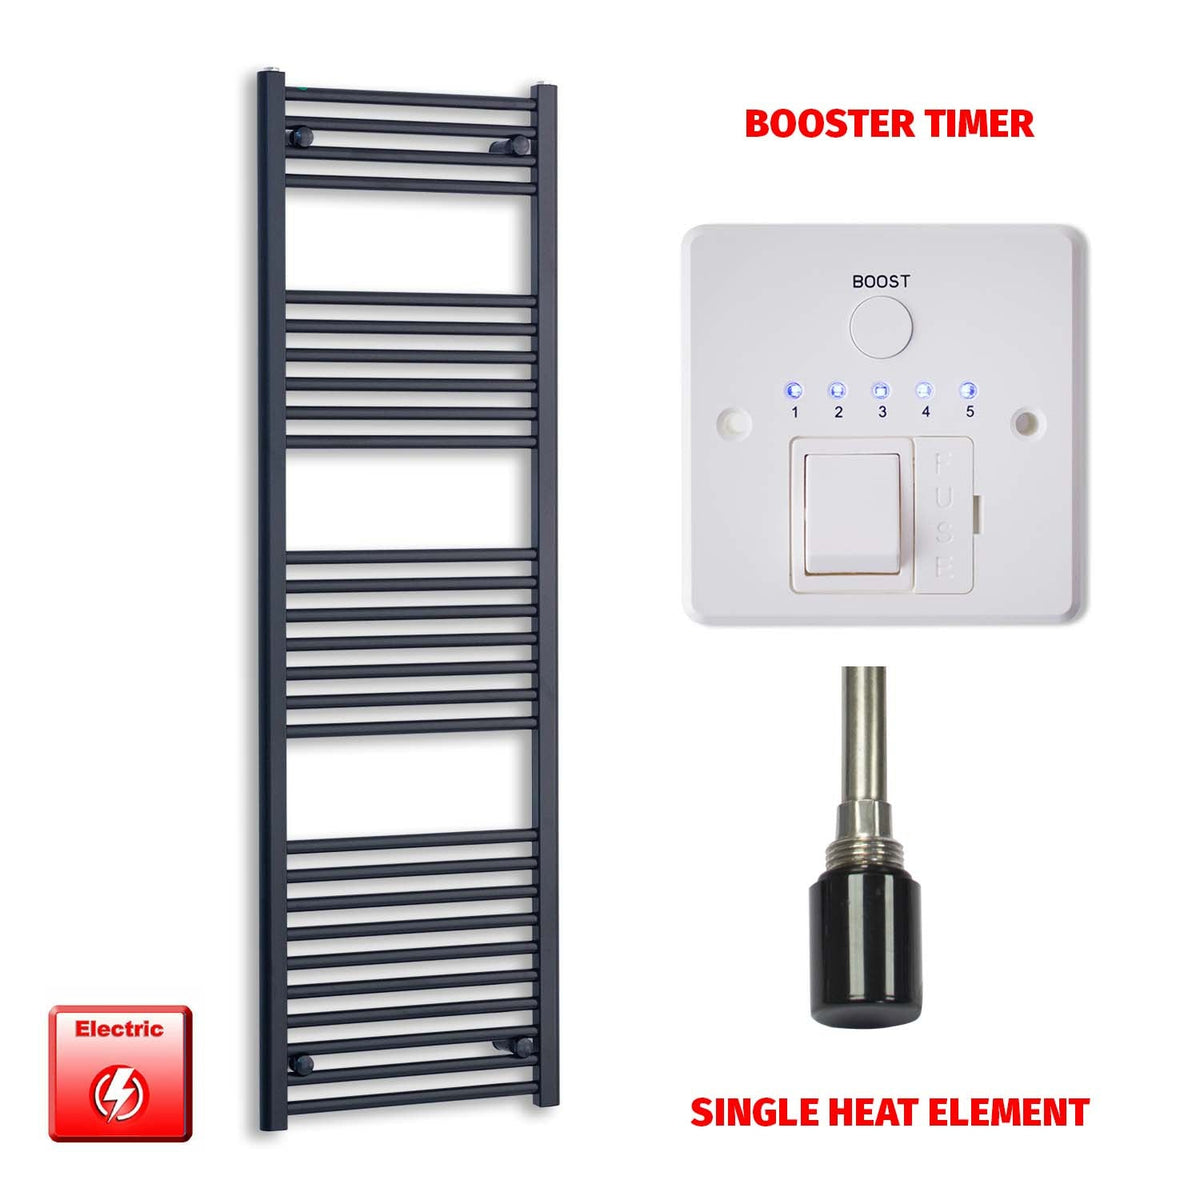 1600mm High 600mm Wide Flat Black Pre-Filled Electric Heated Towel Radiator HTR Booster Timer